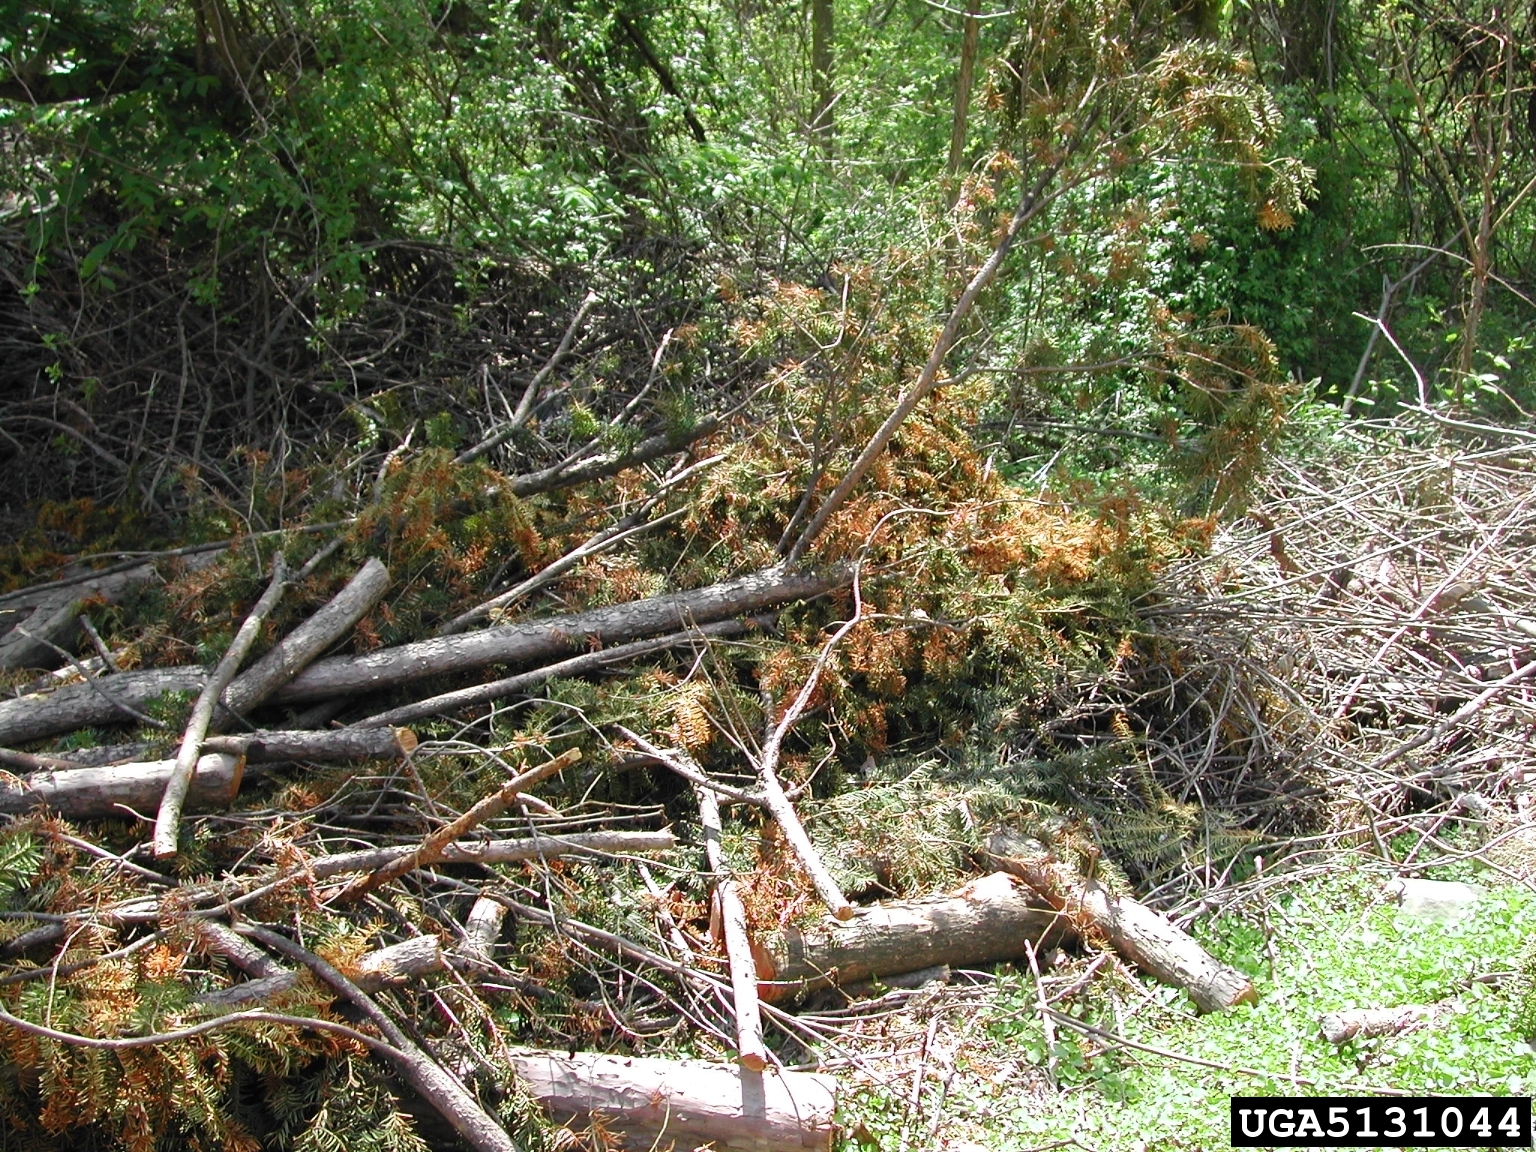 image of woody debris in a forest